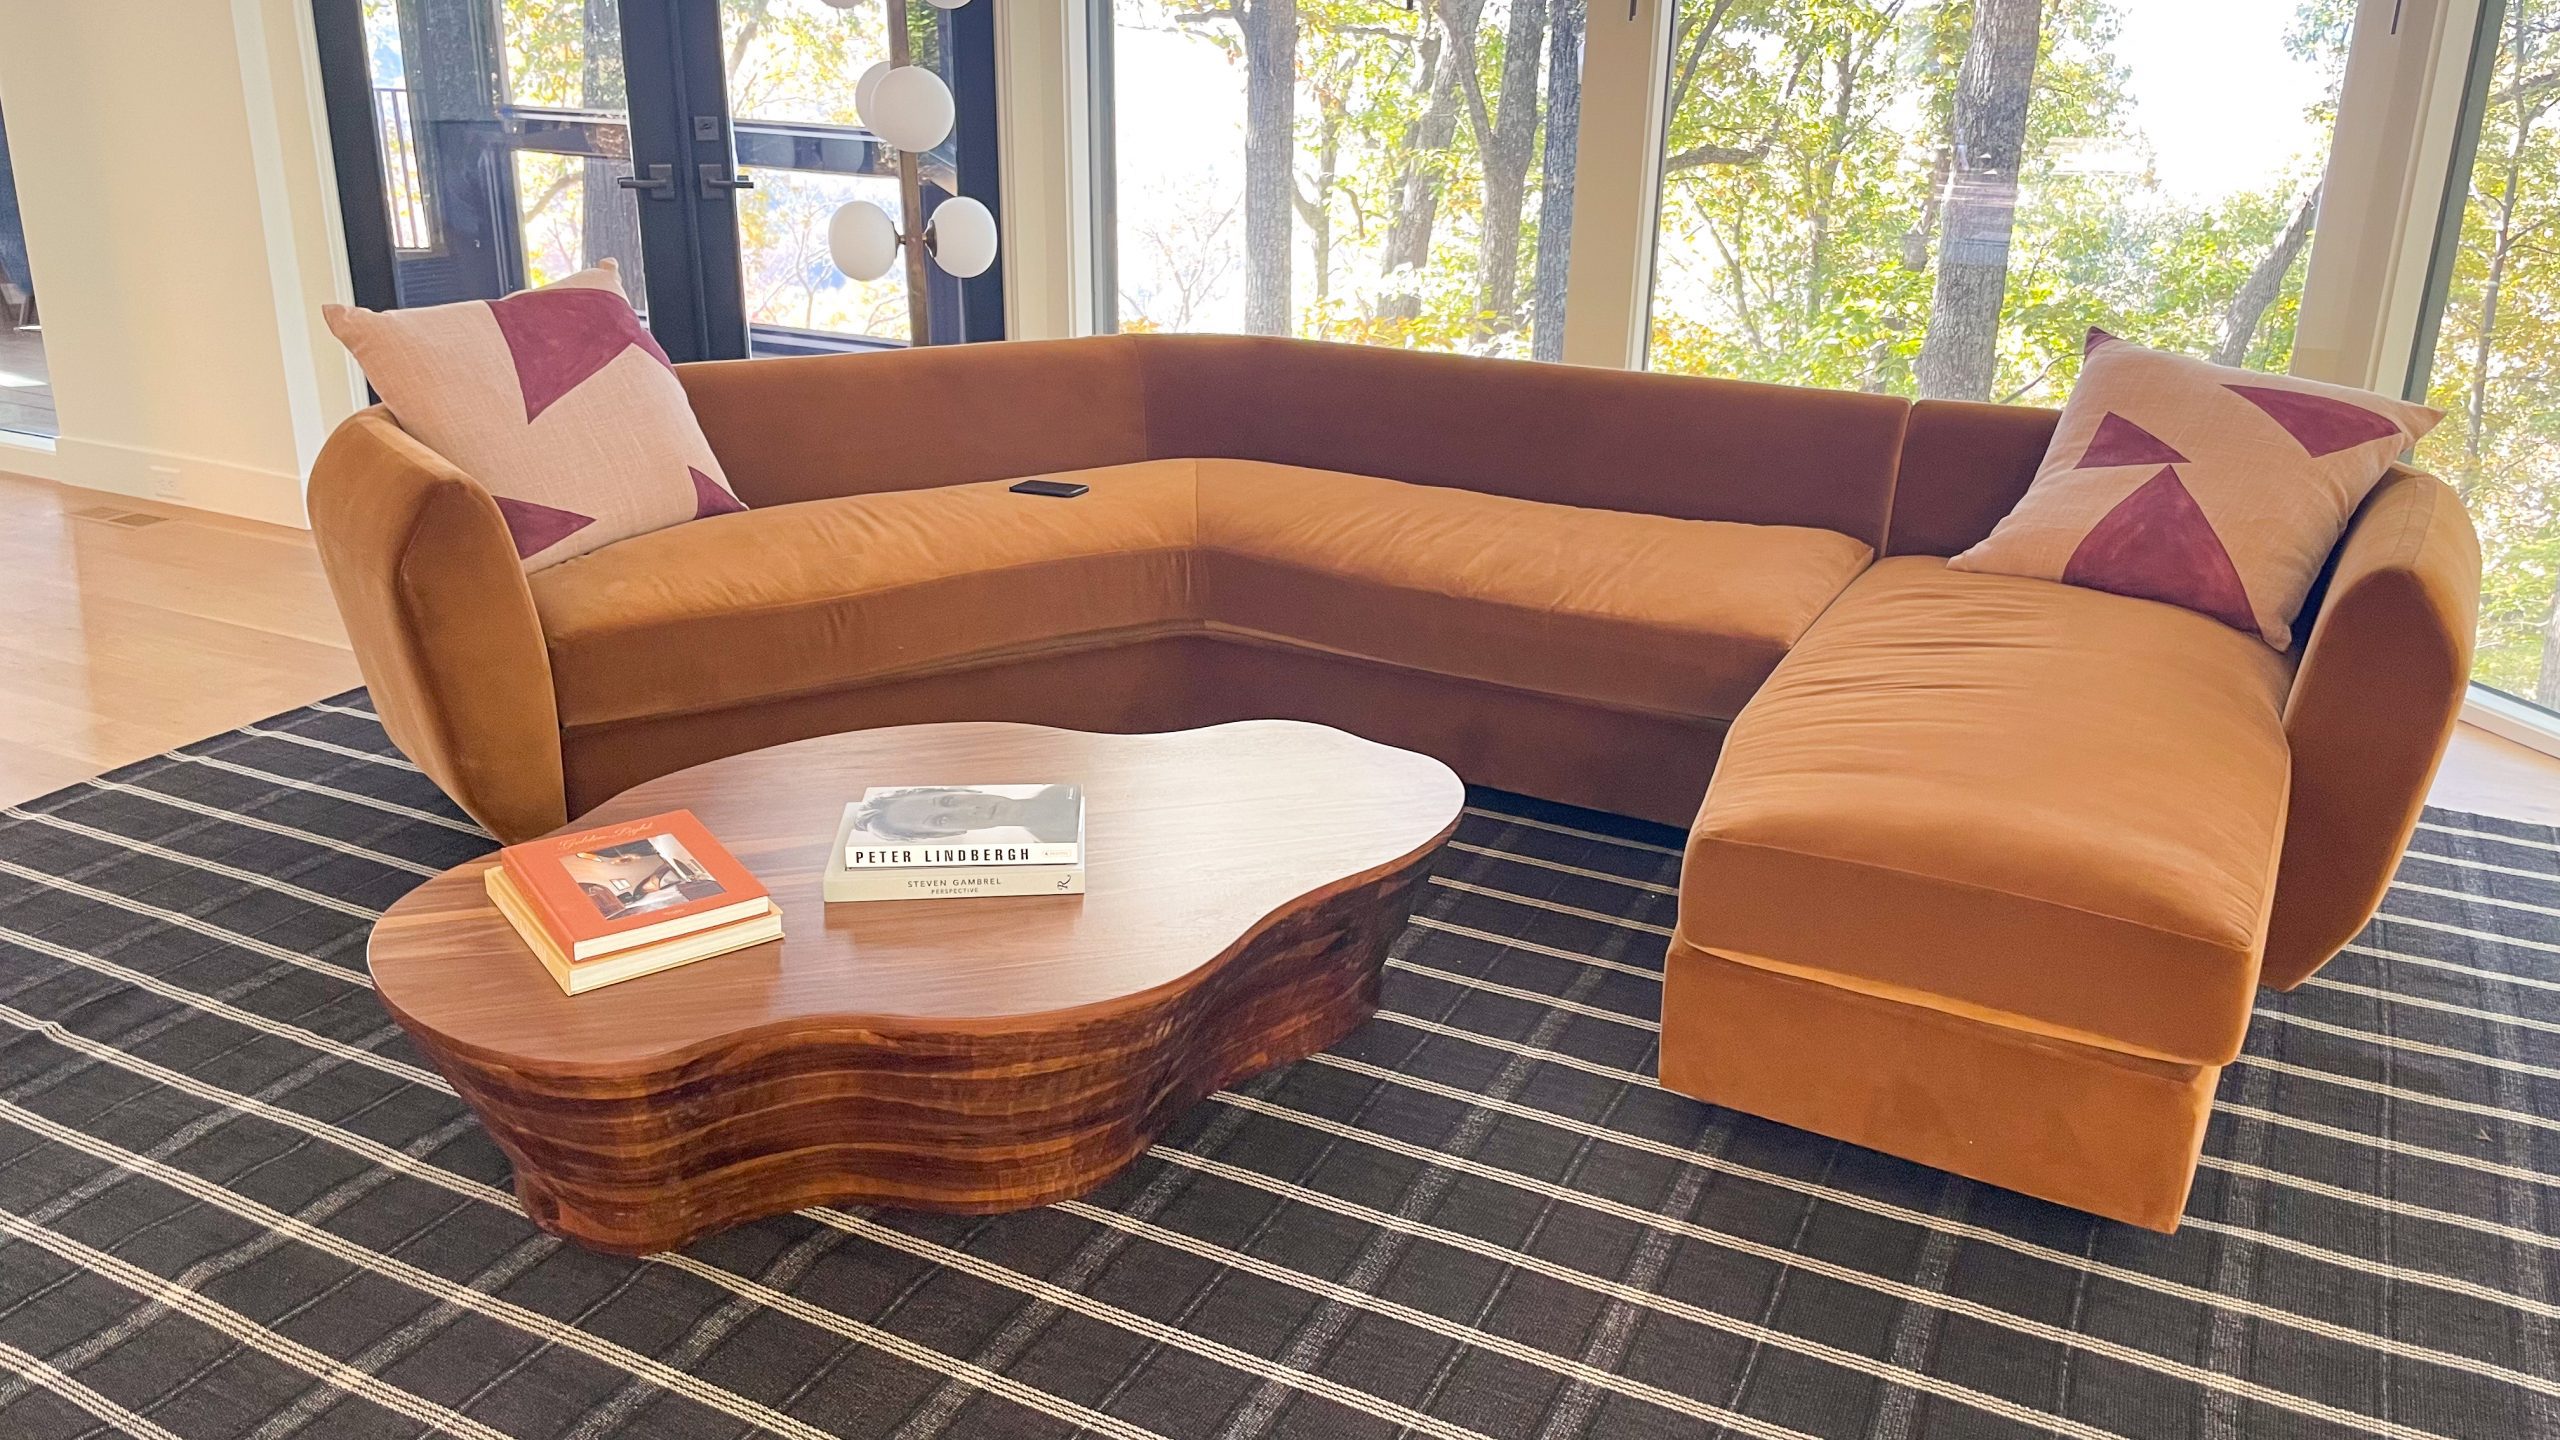 Organic shaped walnut coffee table with couch